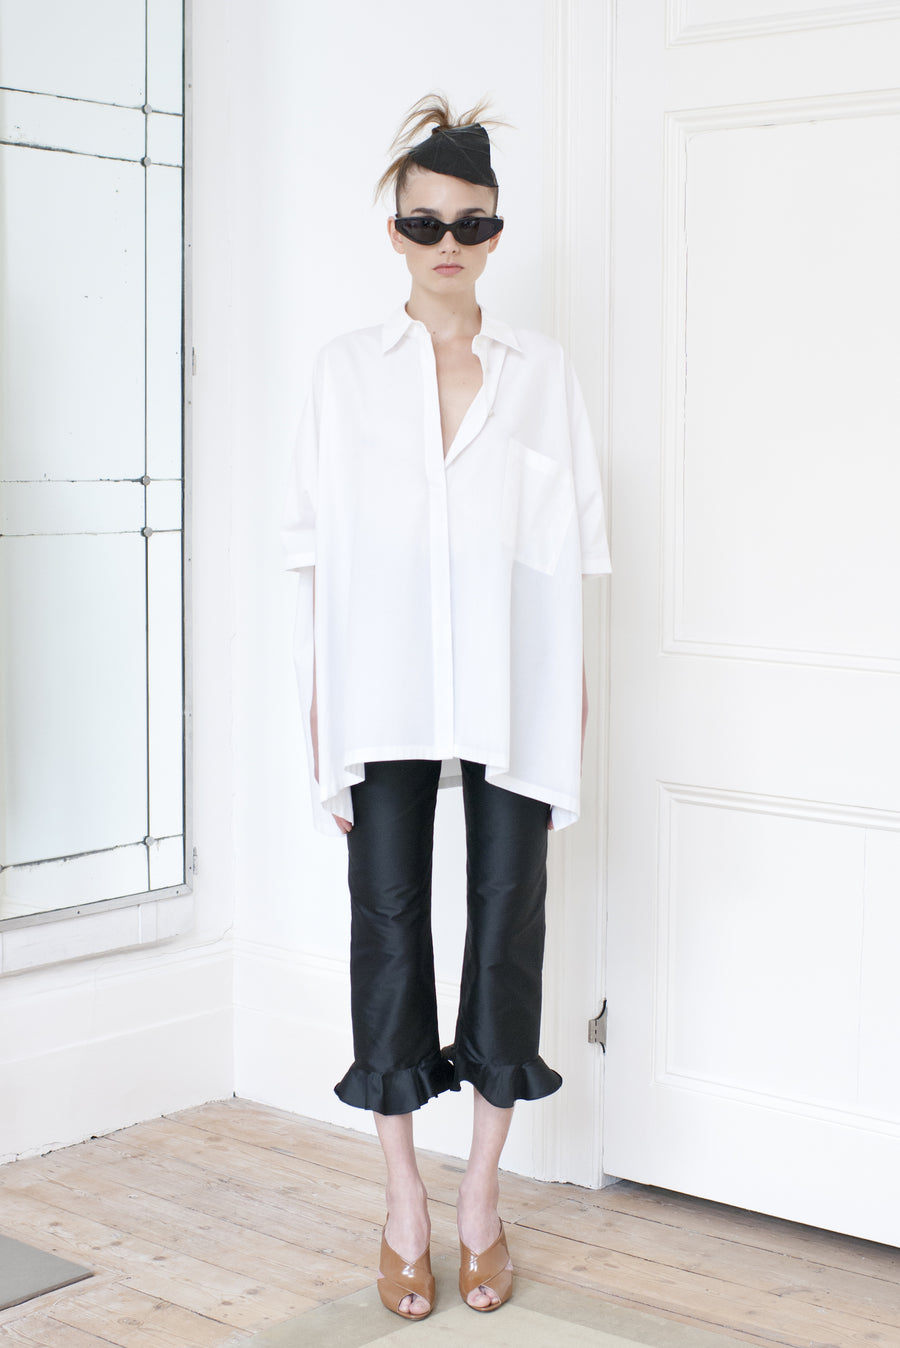 SS2016 / Look 10